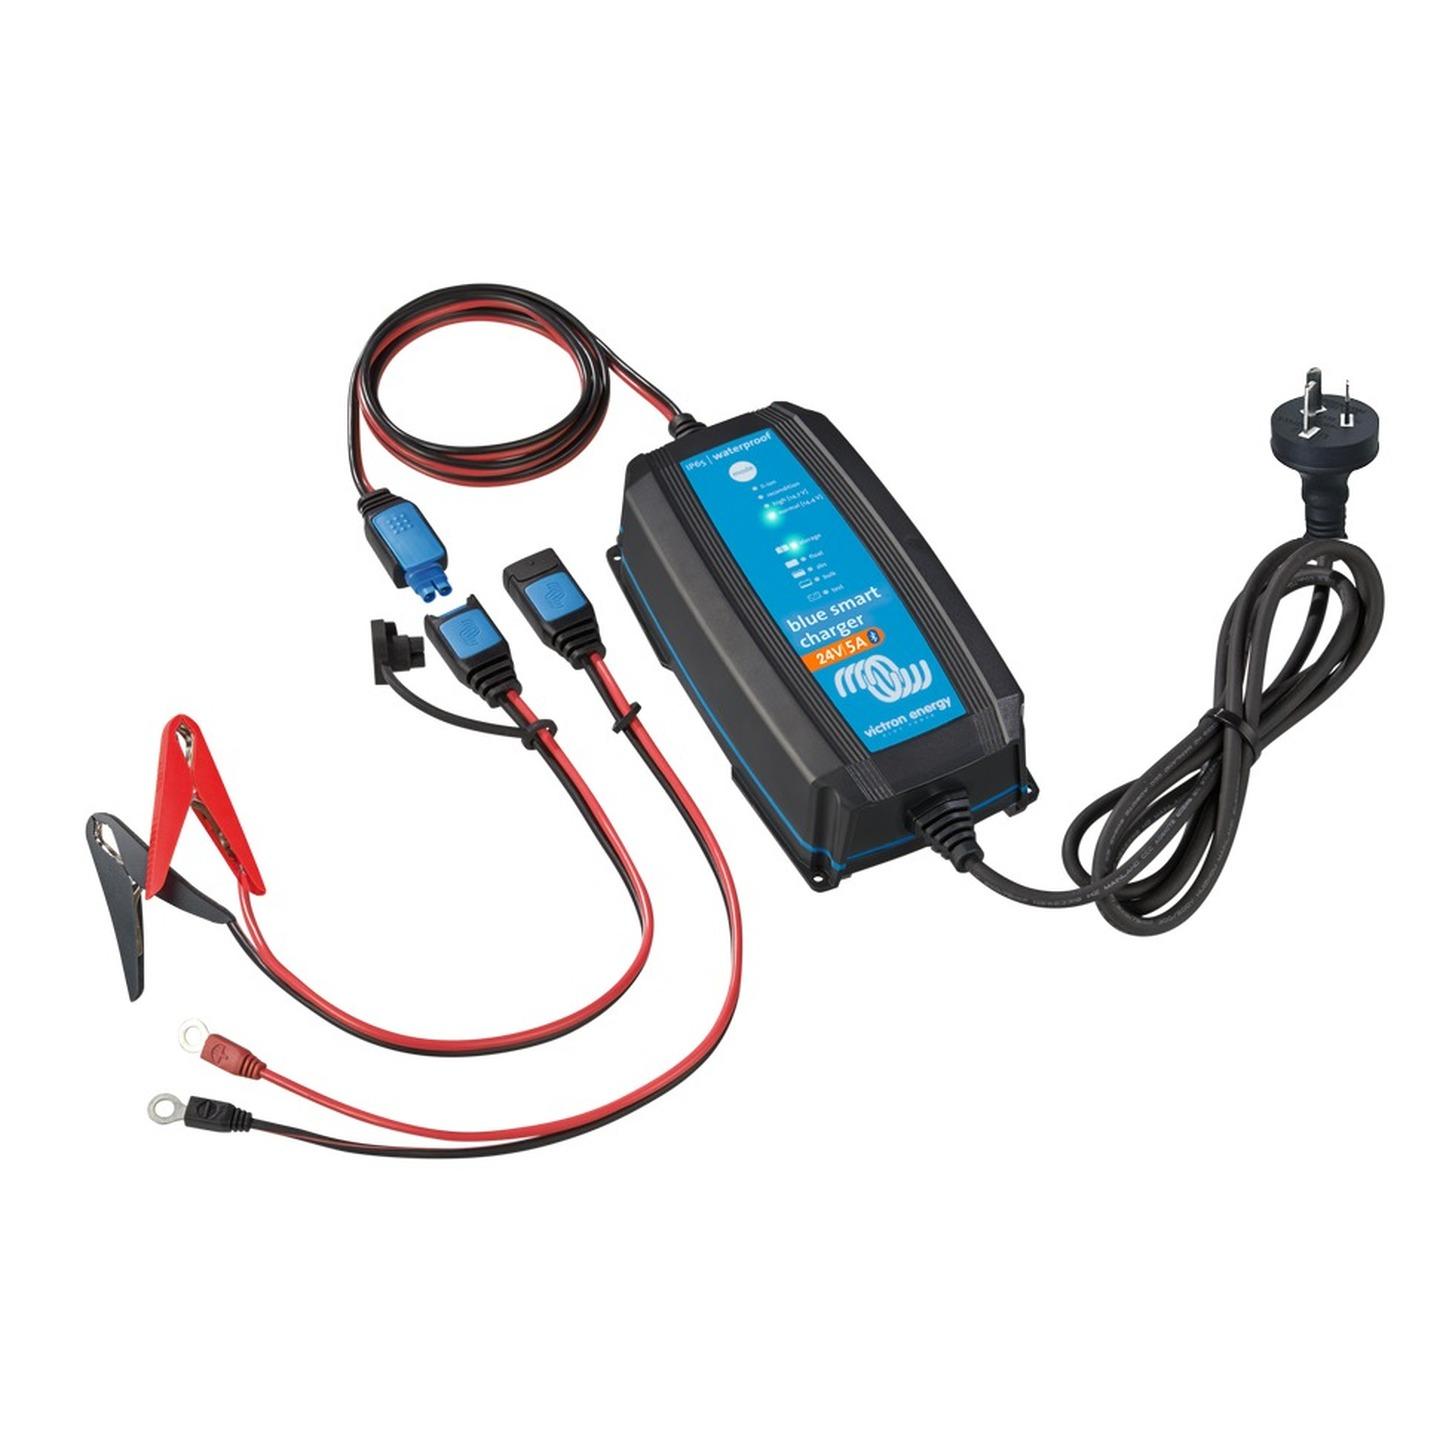 Victron Profesional IP65 Blue Smart Charger 12V 5A with Bluetooth and DC Connector